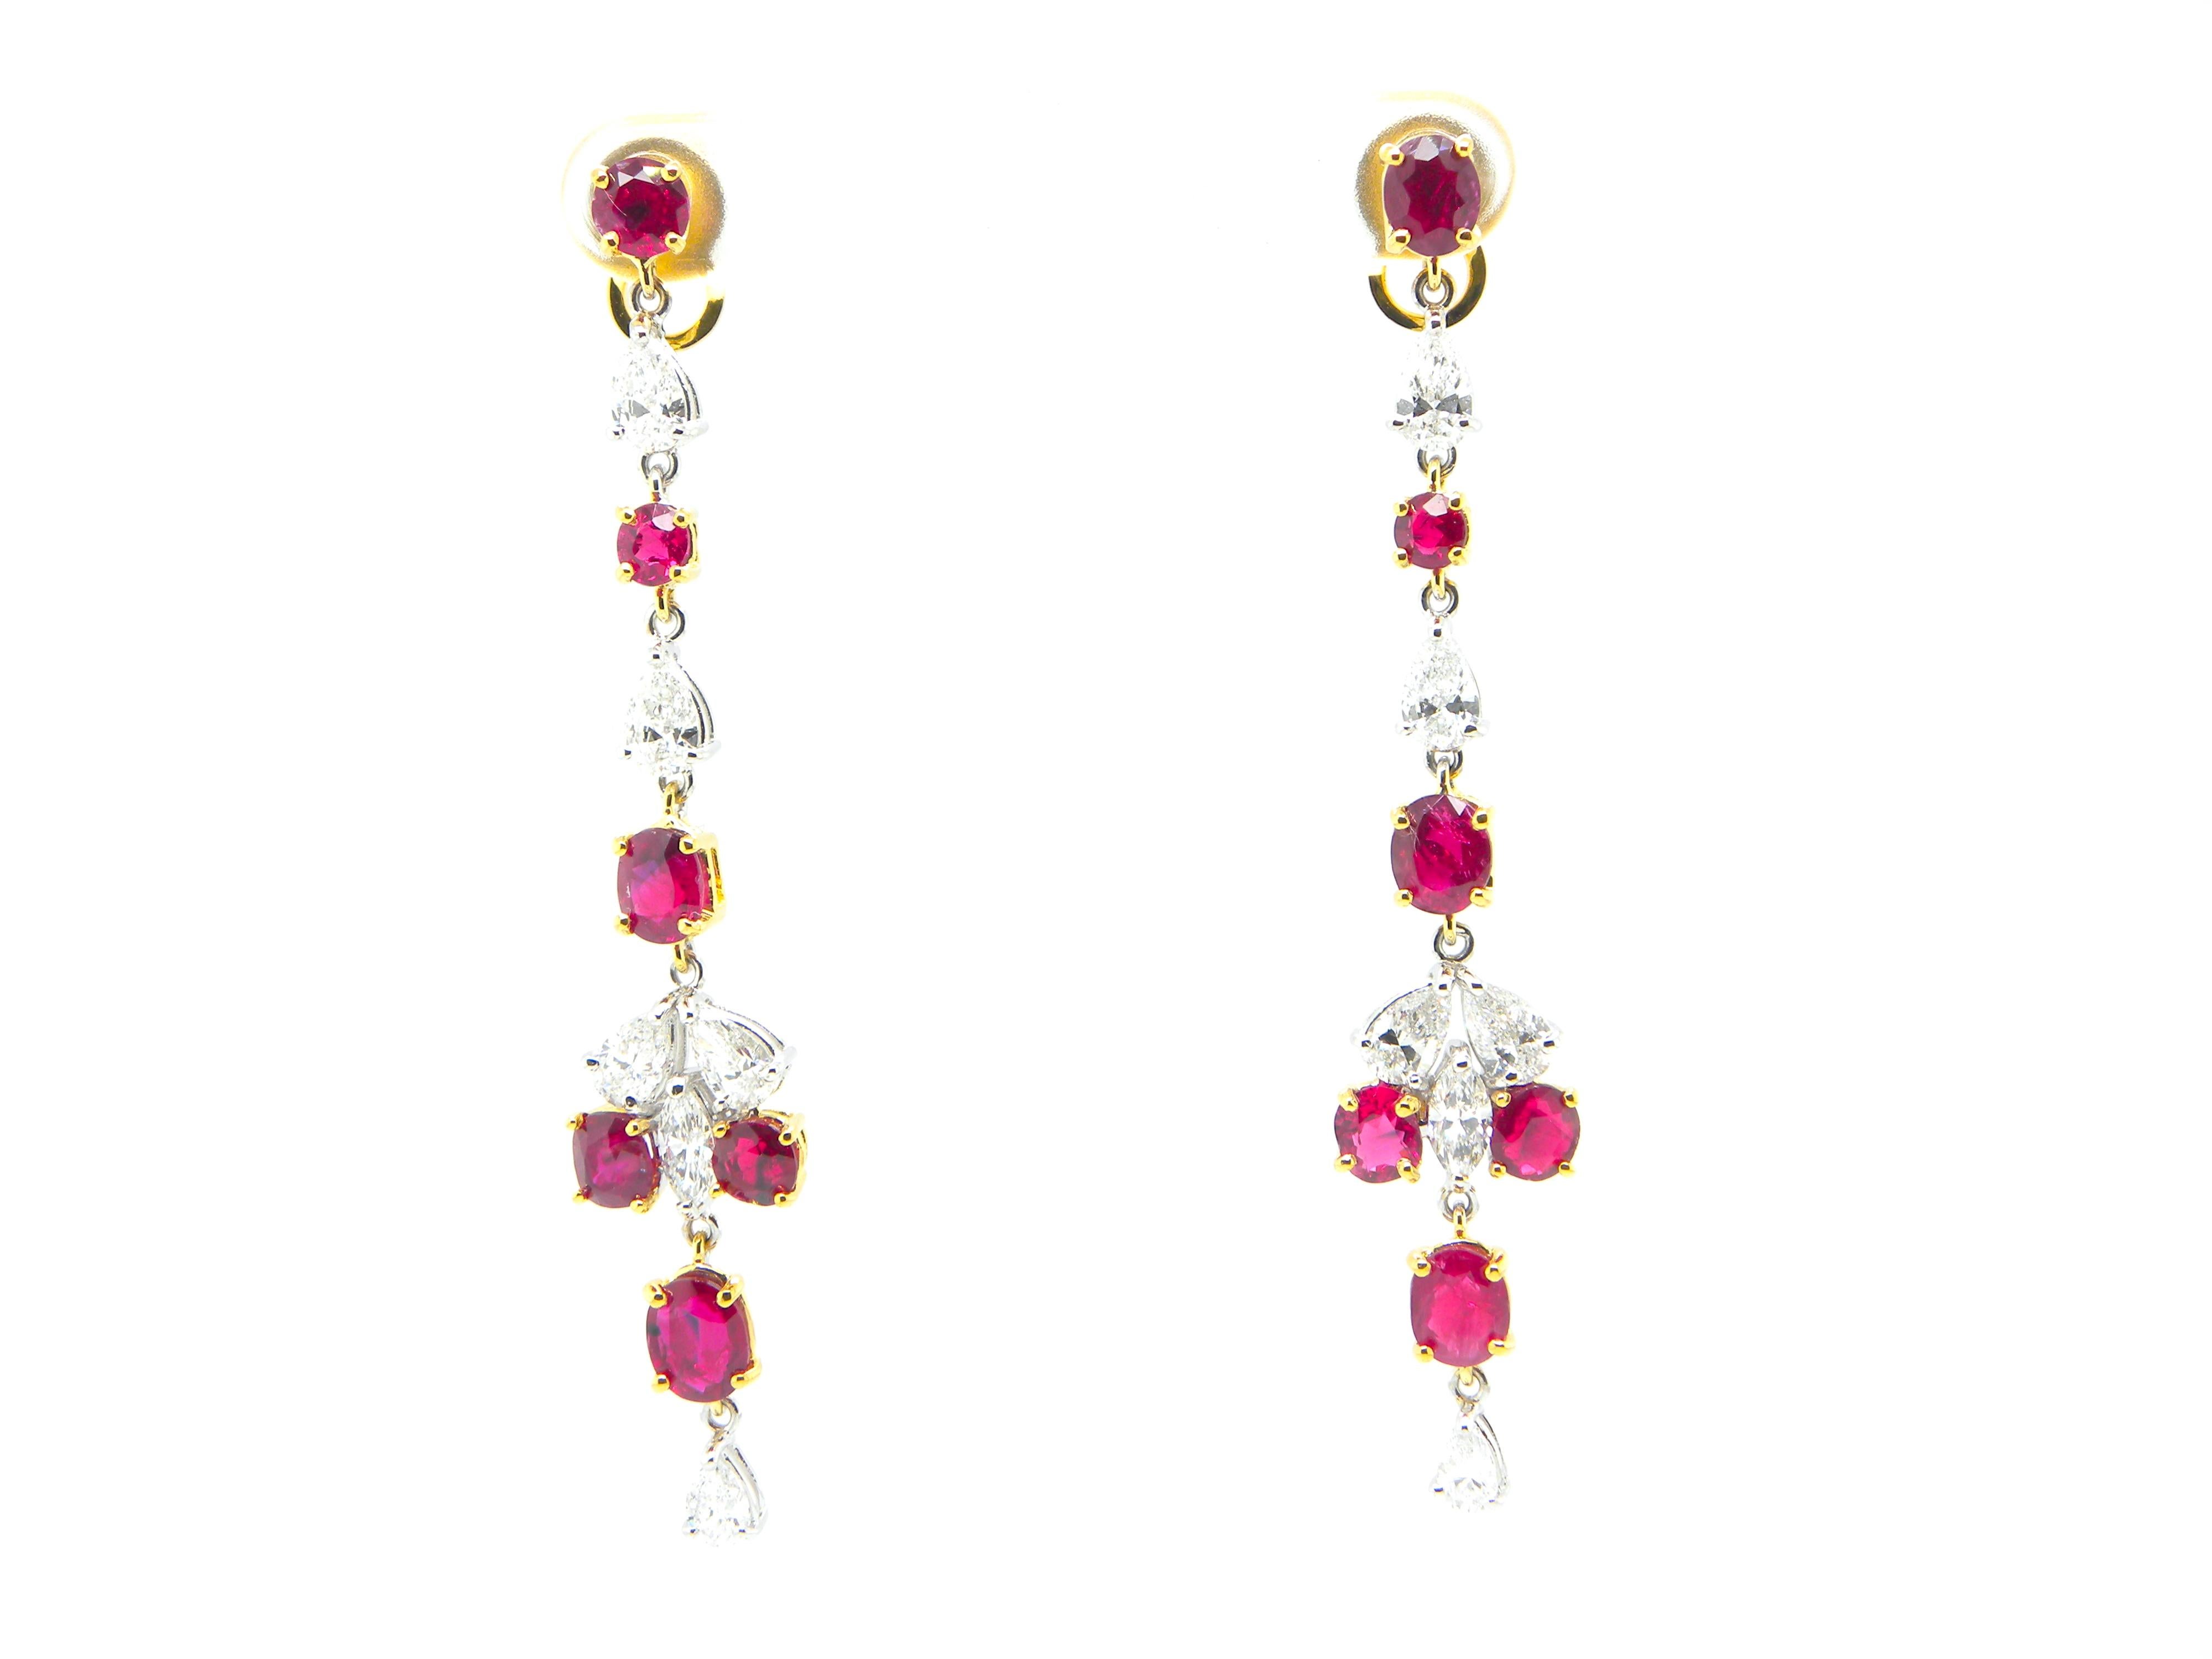 6.03 Carat GIA Certified Burma No Heat Pigeon's Blood Red Ruby and Diamond Gold Earrings:

A beautiful pair of earrings, it features twelve oval-cut and cushion-cut unheated Burmese pigeon's blood red rubies weighing 6.03 carat, embellished with